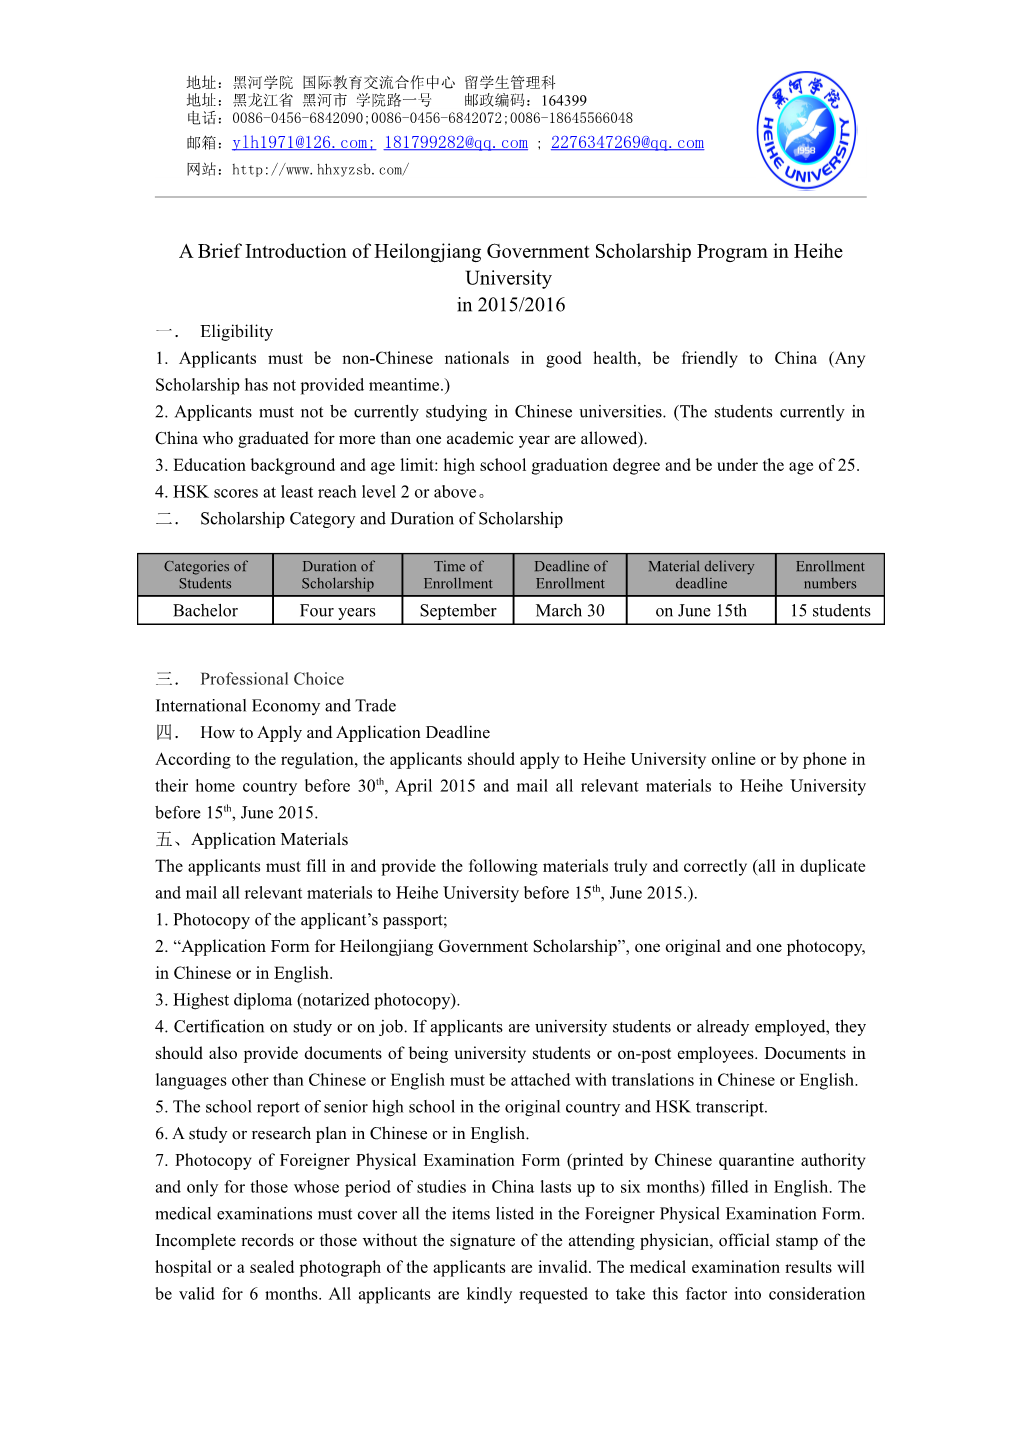 A Brief Introduction of Heilongjiang Government Scholarship Program in Heihe University